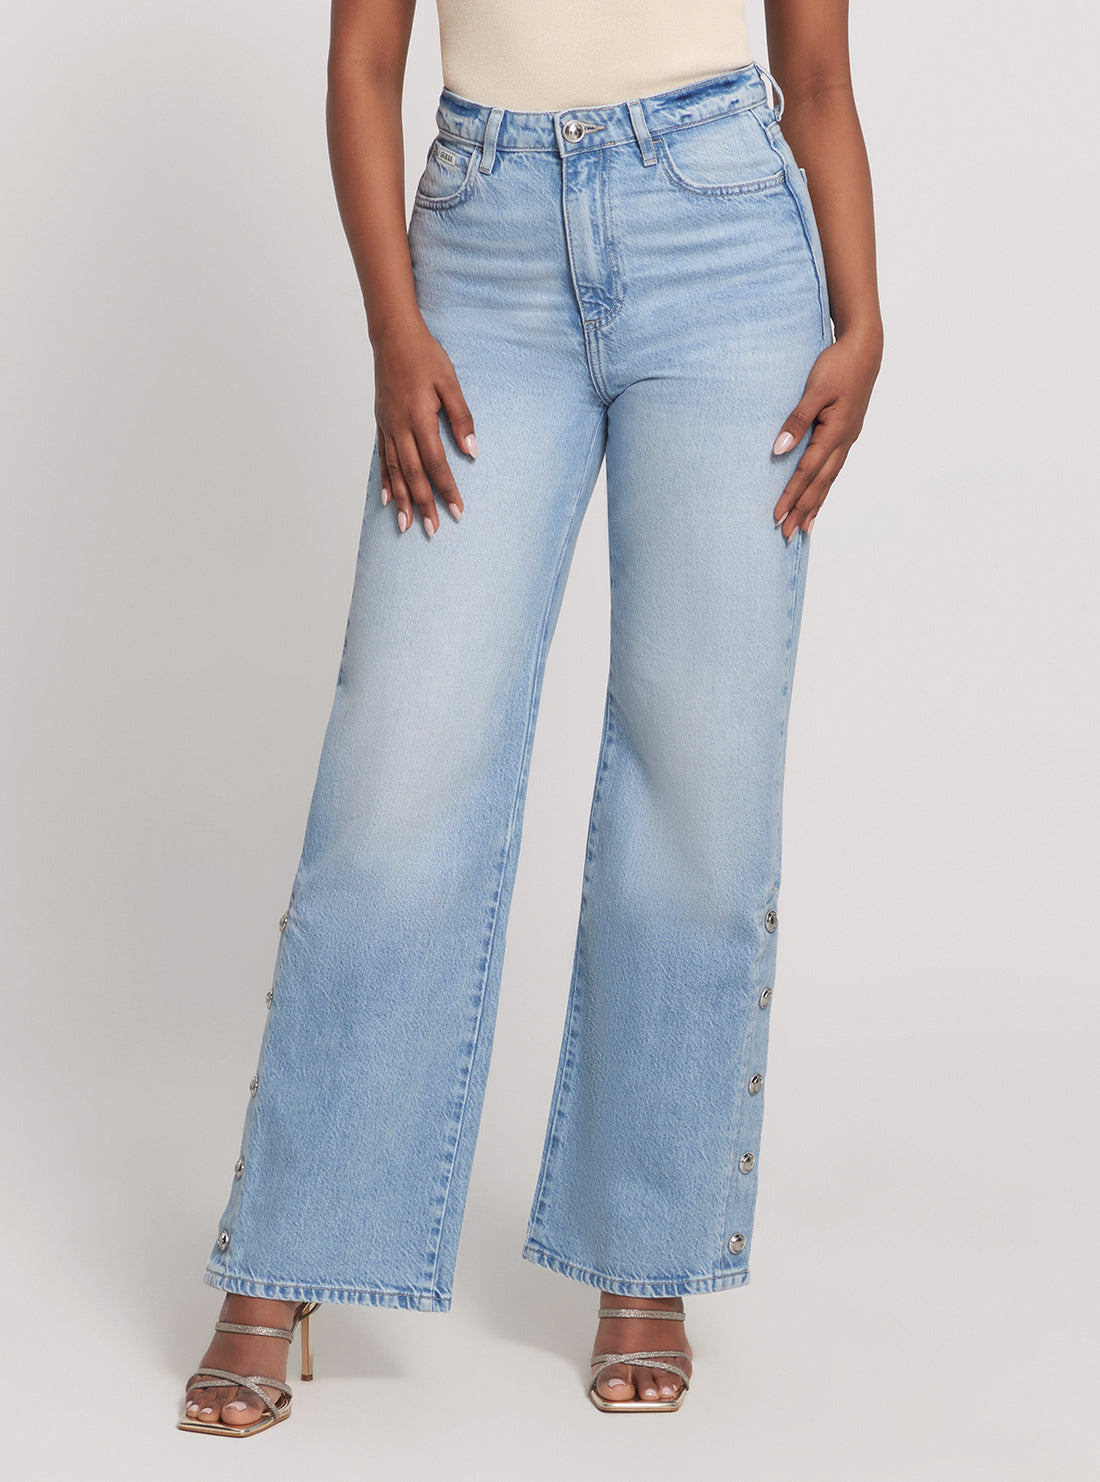 GUESS High-Rise Paz Wide Leg Denim Jeans in Light Wash front view